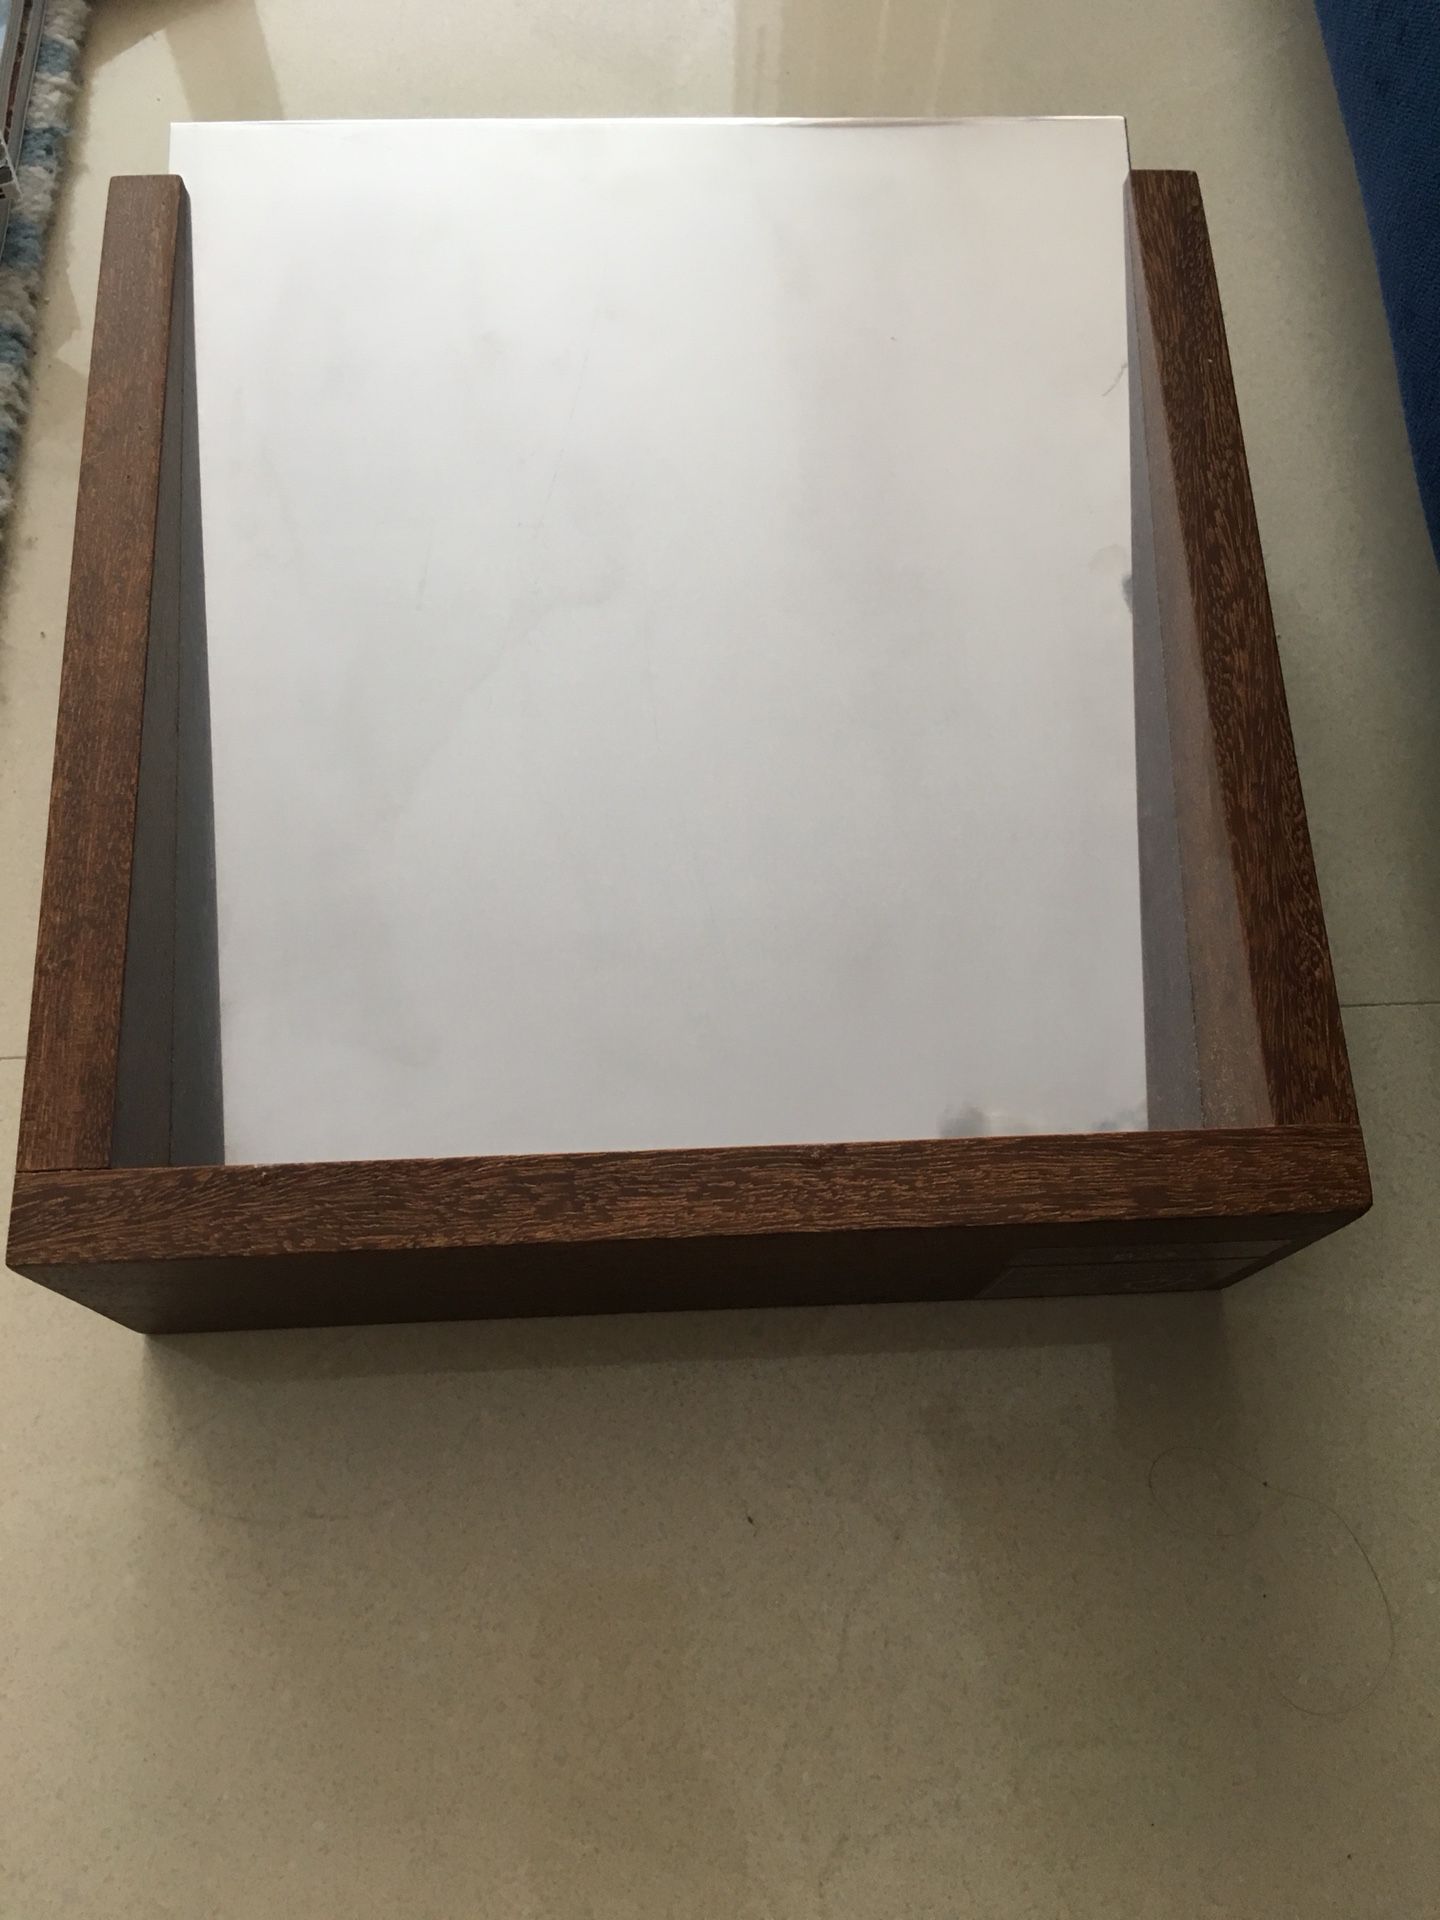 Stainless and wood document holder